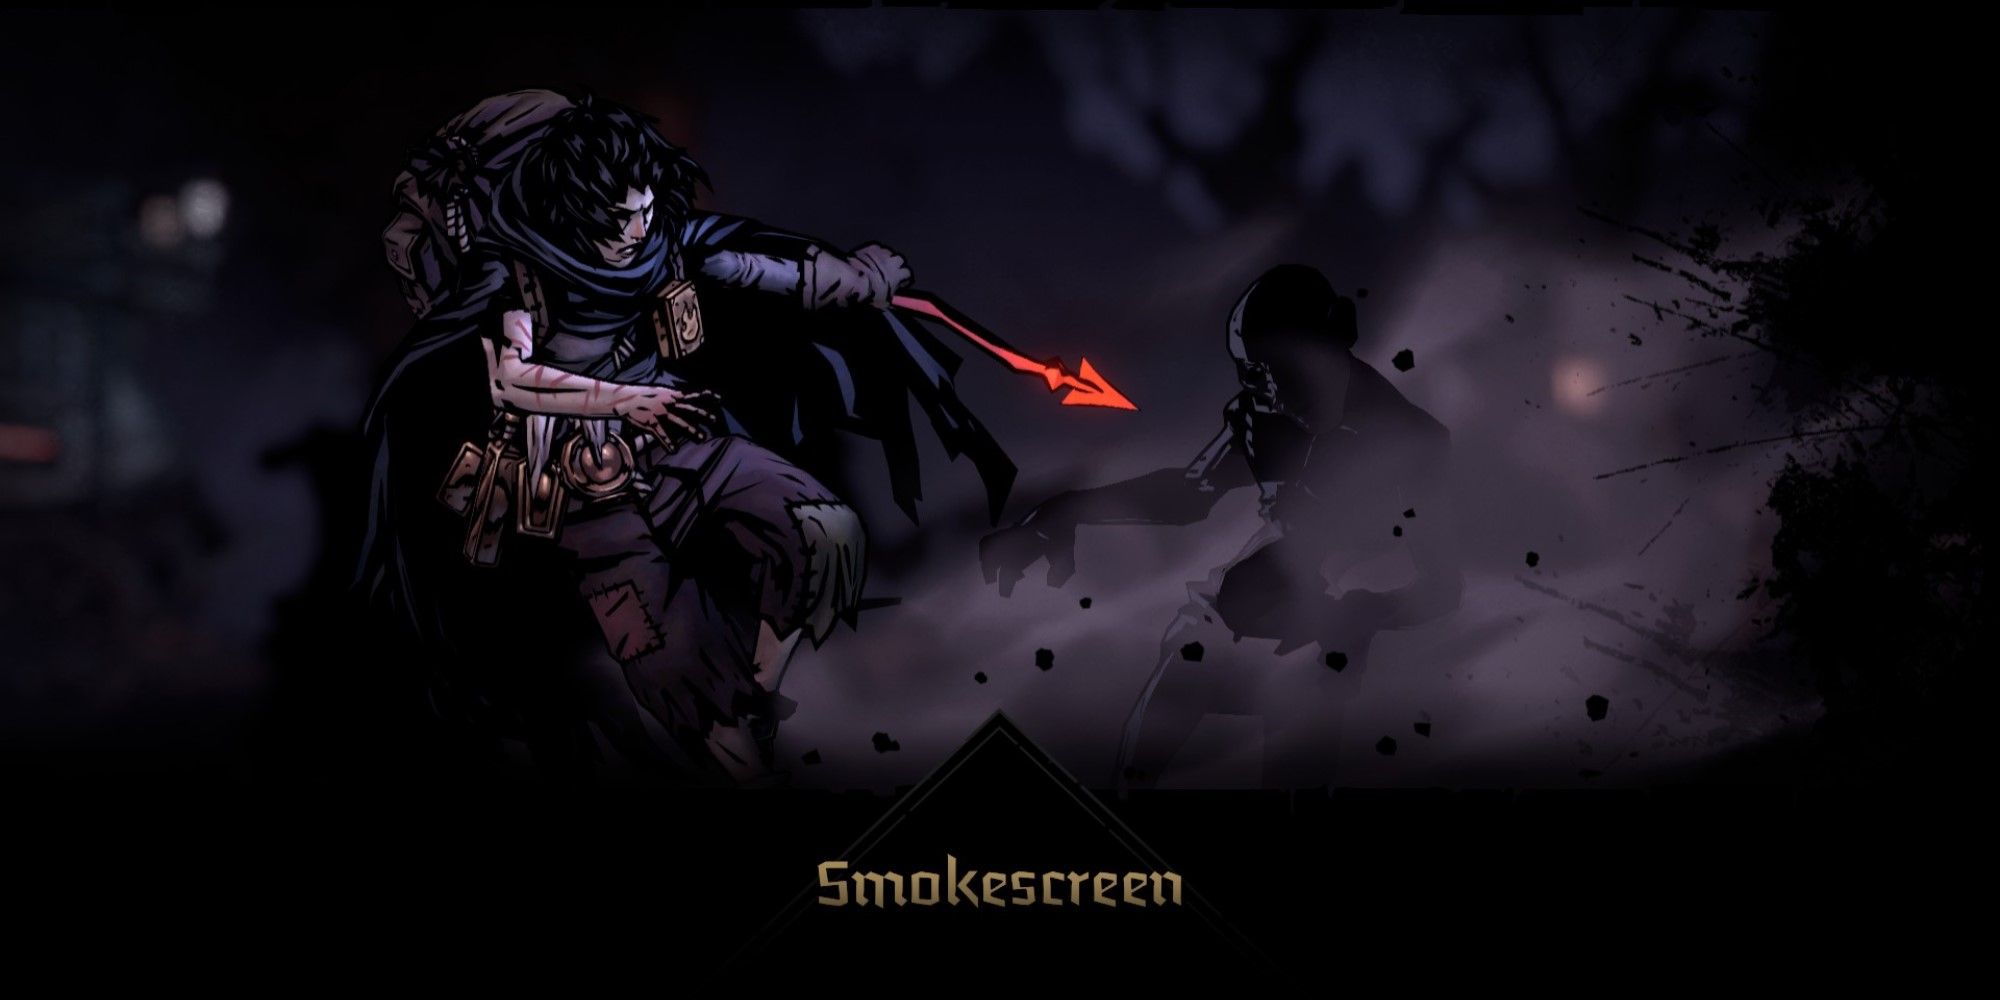 A screenshot of the Smokescreen Skill being used in Darkest Dungeon 2